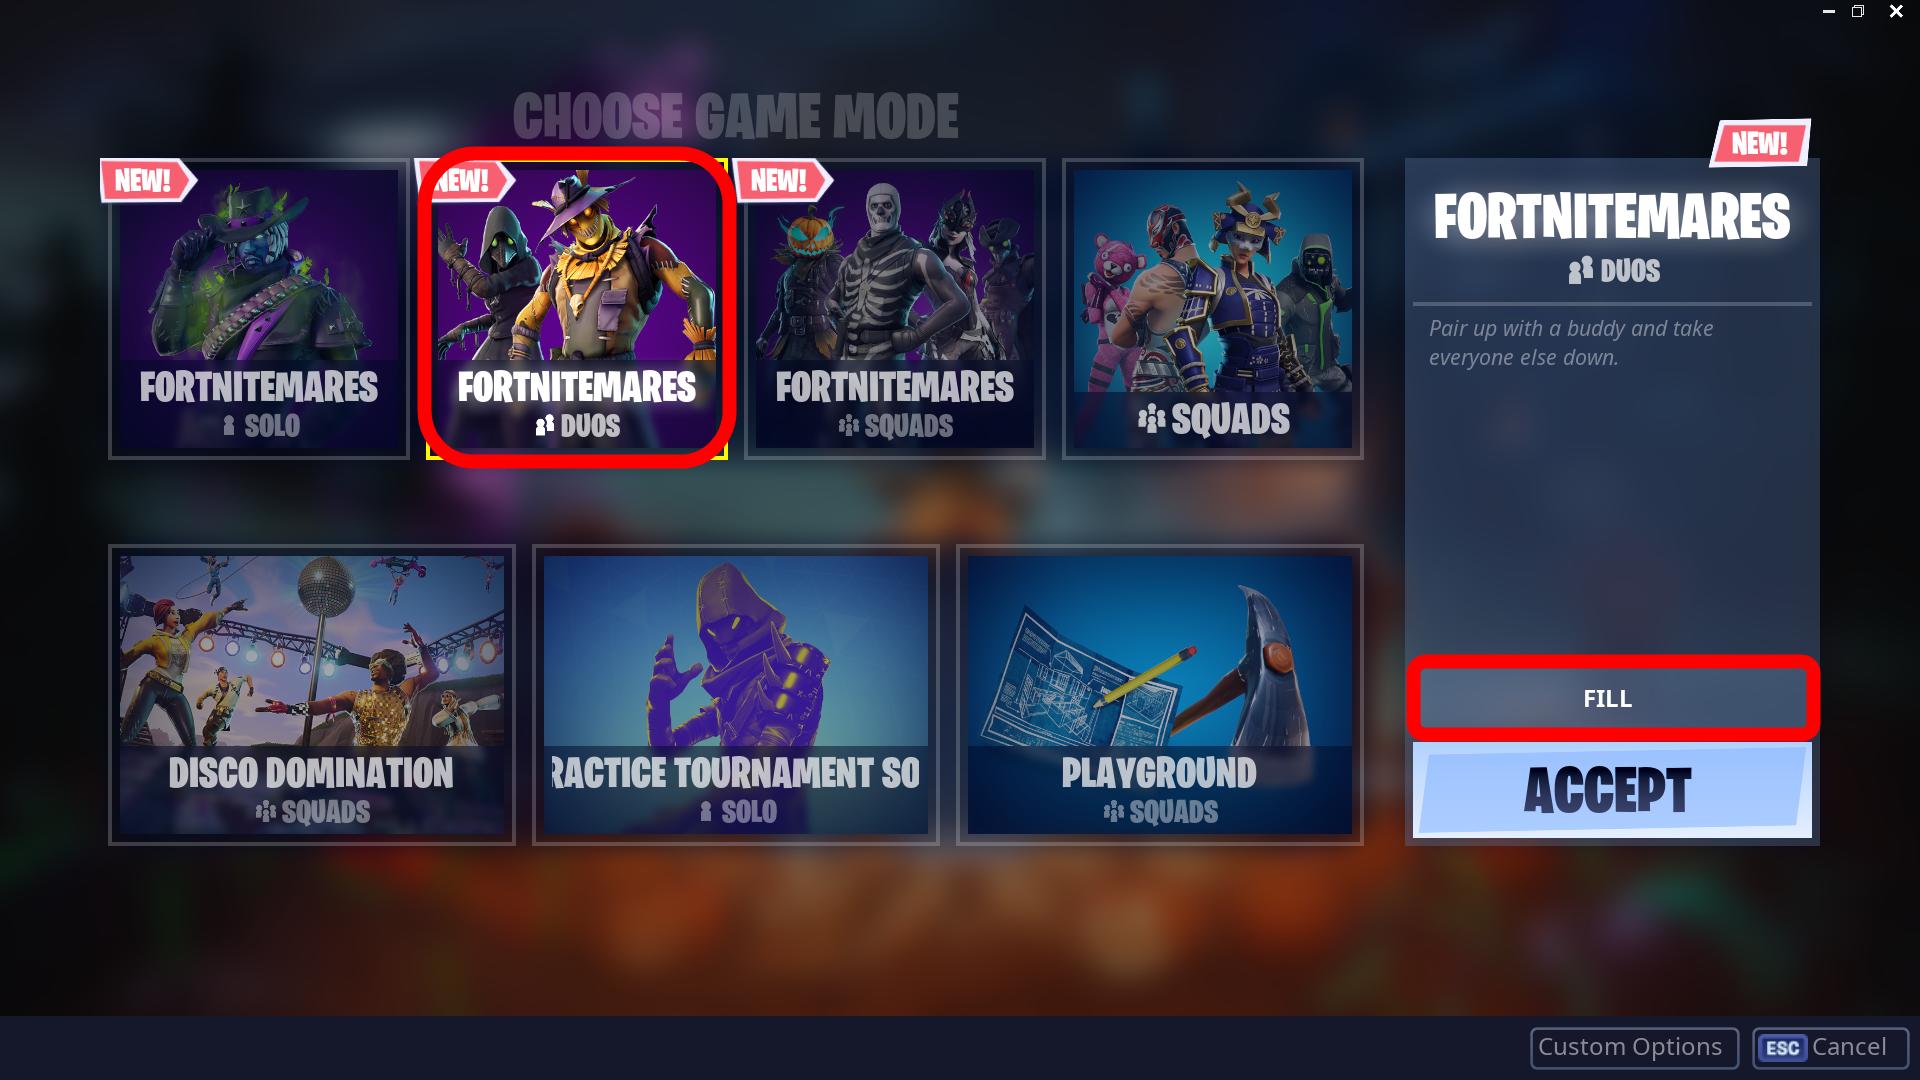 and fortnite will matchmake you with other players online otherwise if you select don t fill you may have to compete against a team of four alone - fortnite beginner building course